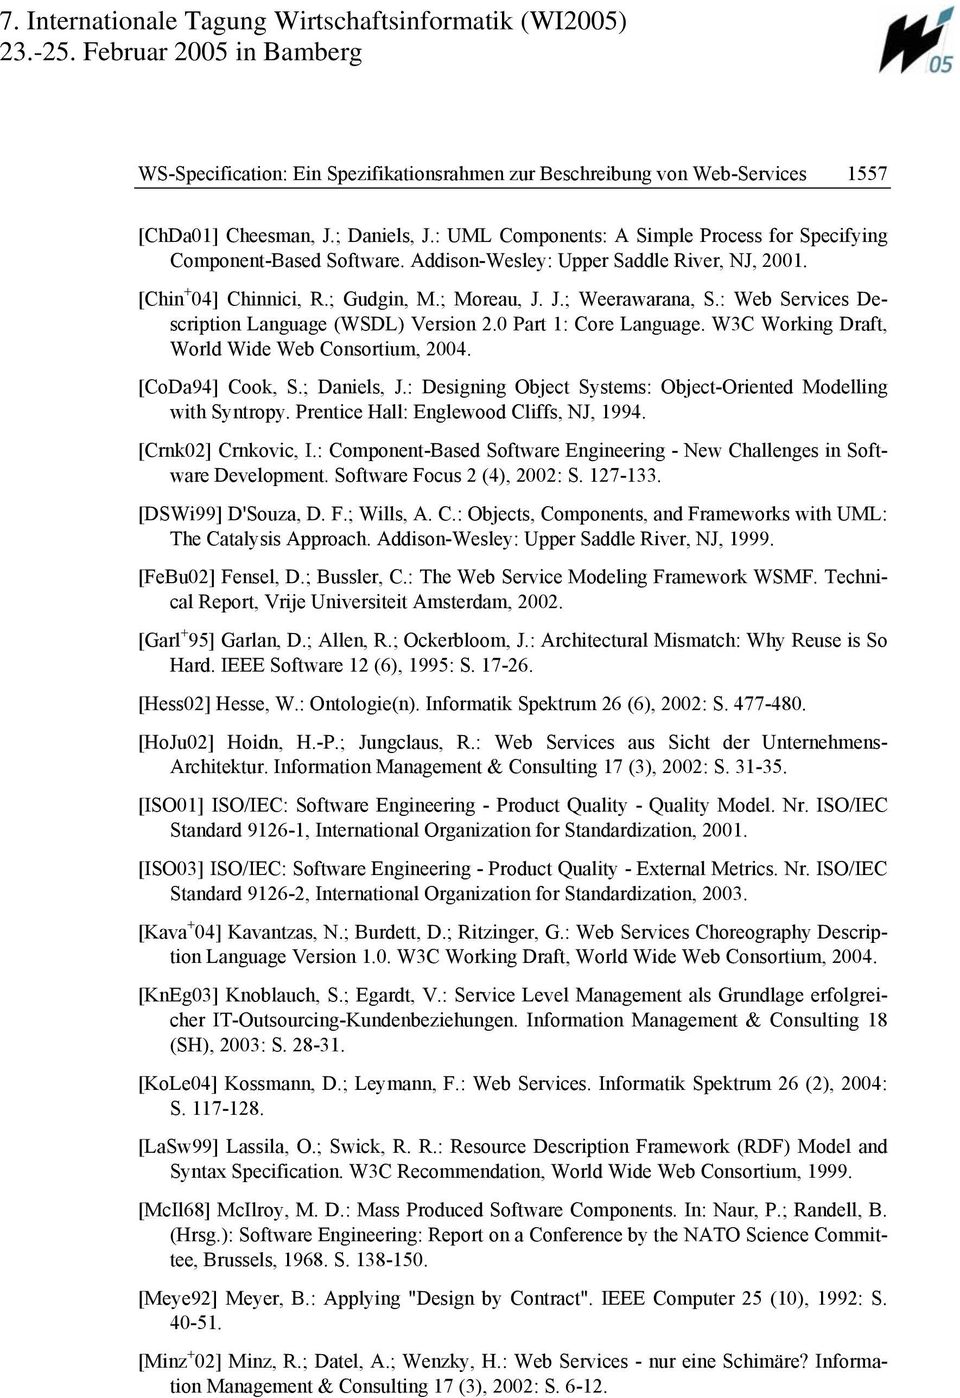 W3C Working Draft, World Wide Web Consortium, 2004. [CoDa94] Cook, S.; Daniels, J.: Designing Object Systems: Object-Oriented Modelling with Syntropy. Prentice Hall: Englewood Cliffs, NJ, 1994.